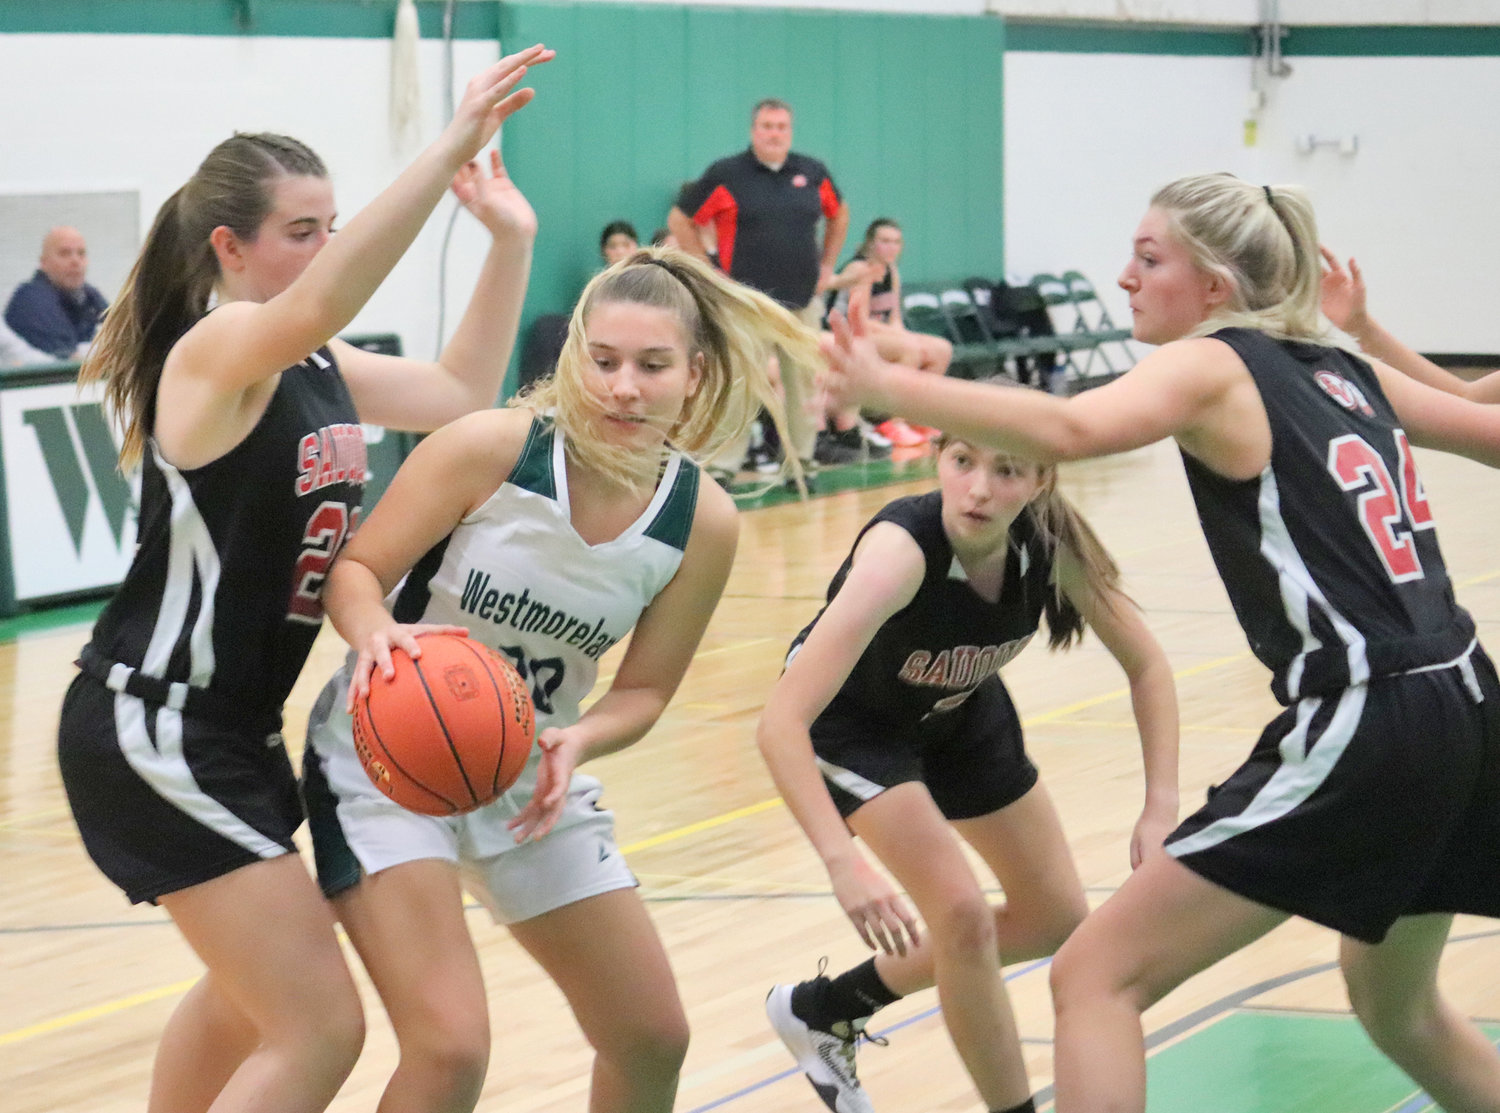 Molly Nestved of Westmoreland drives to the basket surrounded by Sauquoit Valley defenders. At left is Makayla Land and closing in on the right is Sydney Nattress. Nestved had a pair of rebounds to help the team to a 55-29 win.